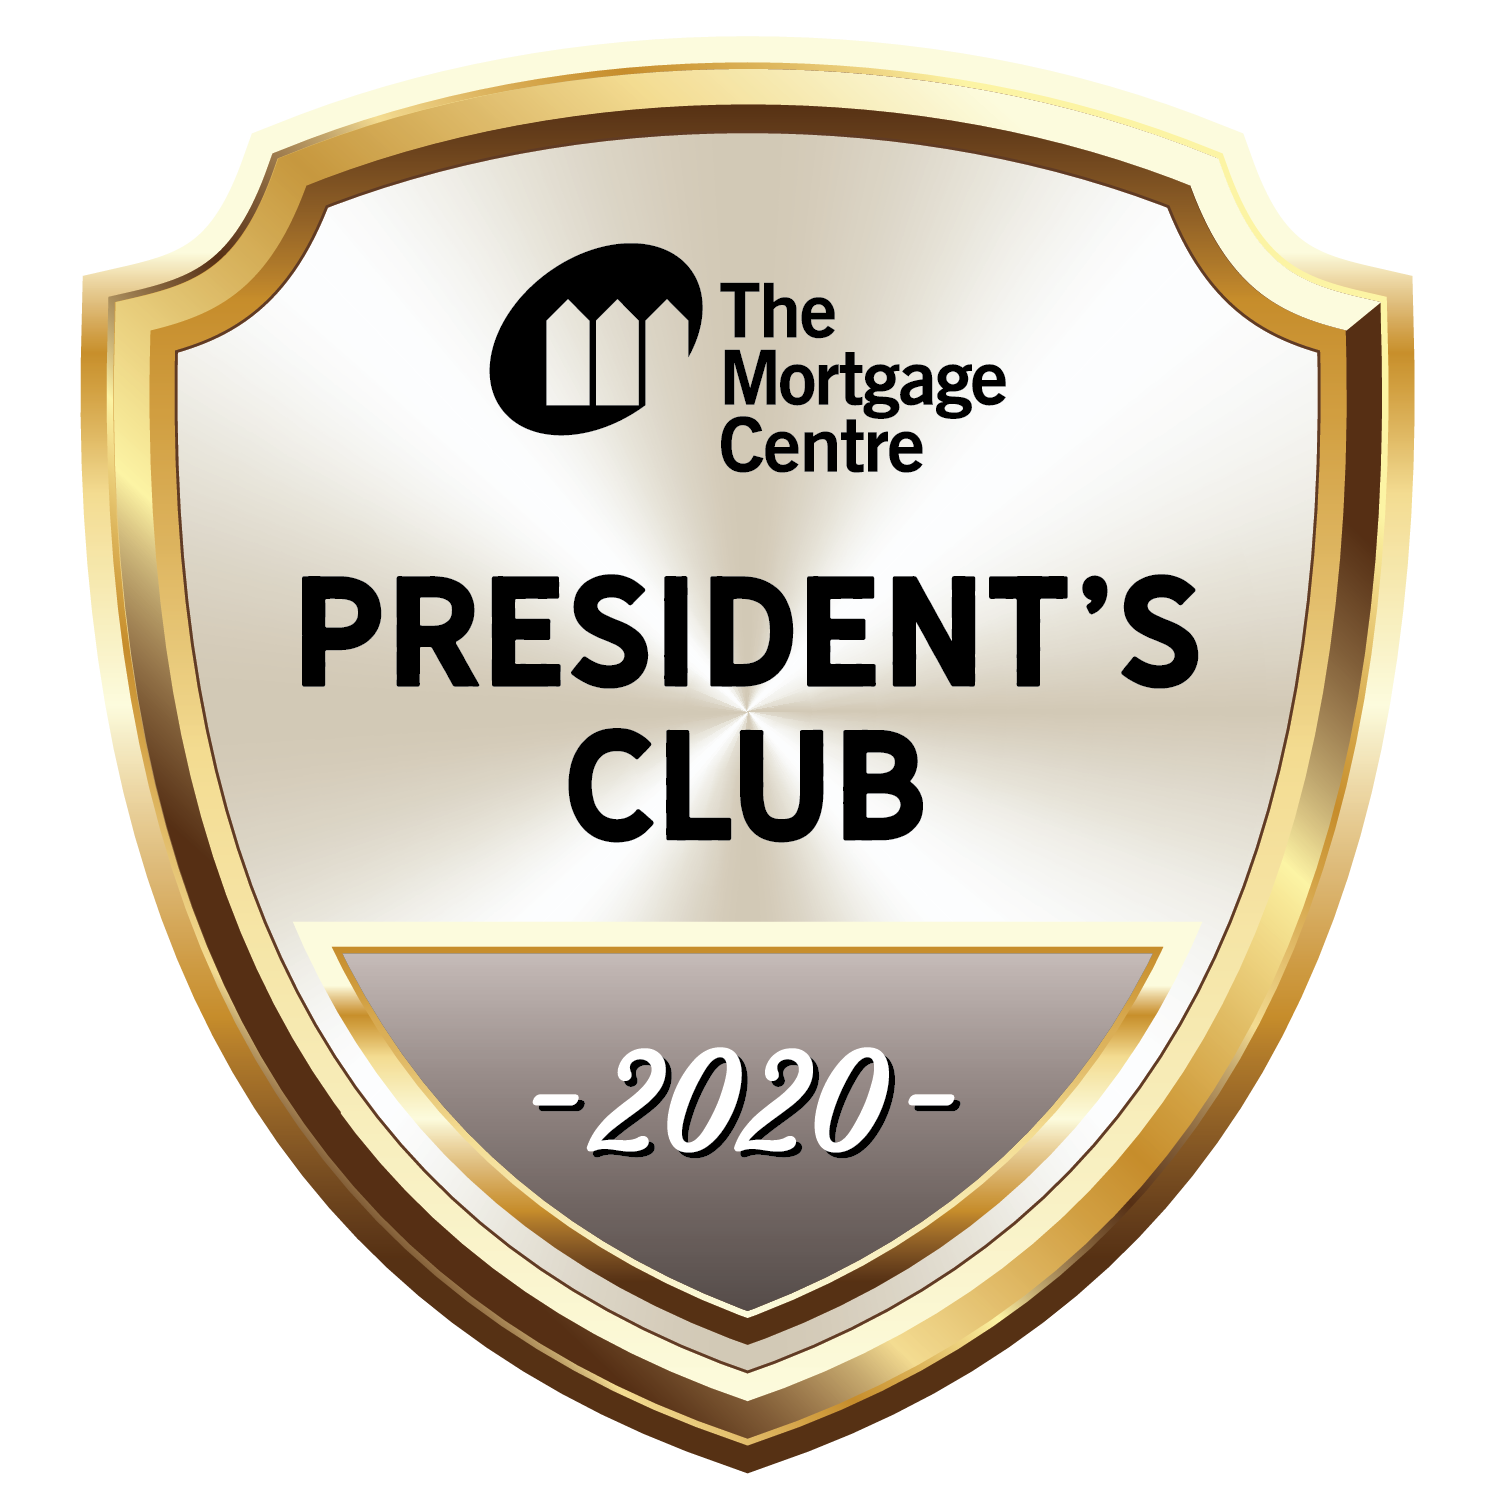 The Mortgage Centre, President's Club, 2020, HCC Mortgages